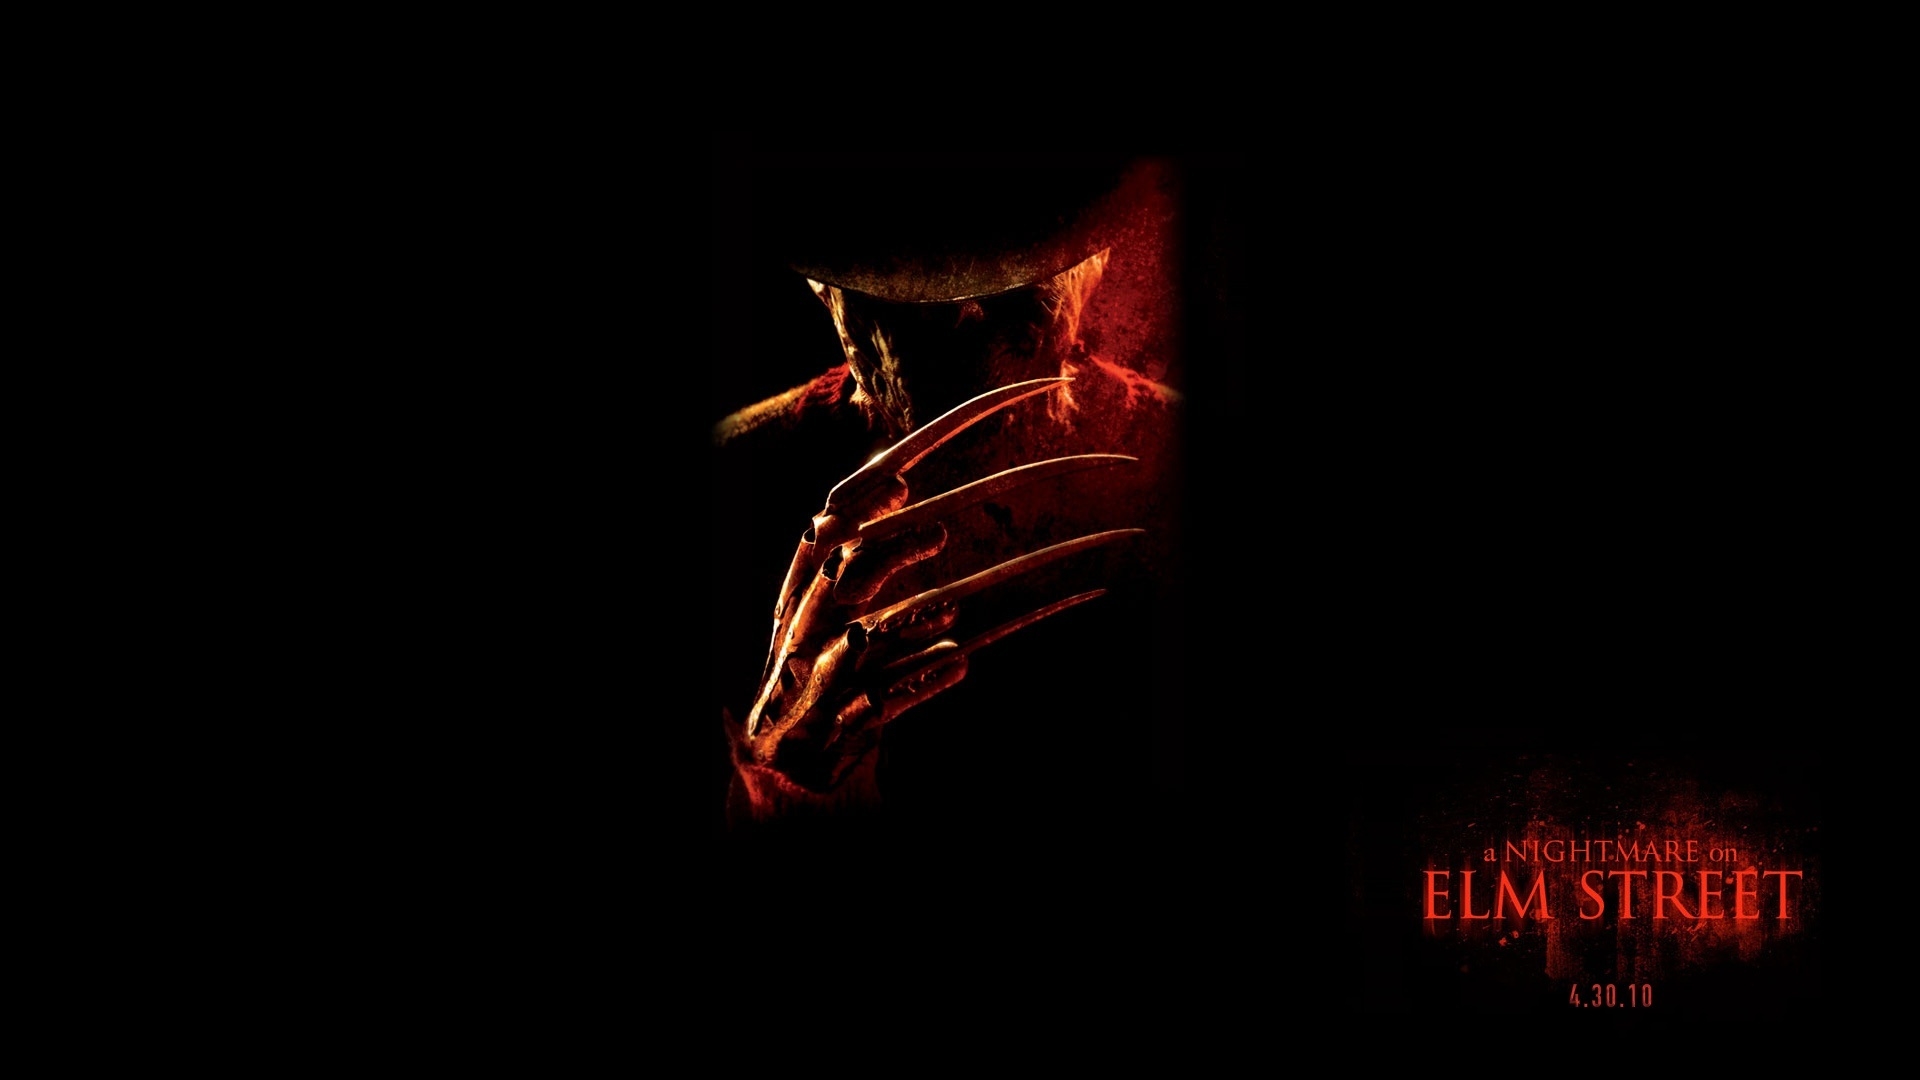 A Nightmare on Elm Street 2010 for 1920 x 1080 HDTV 1080p resolution